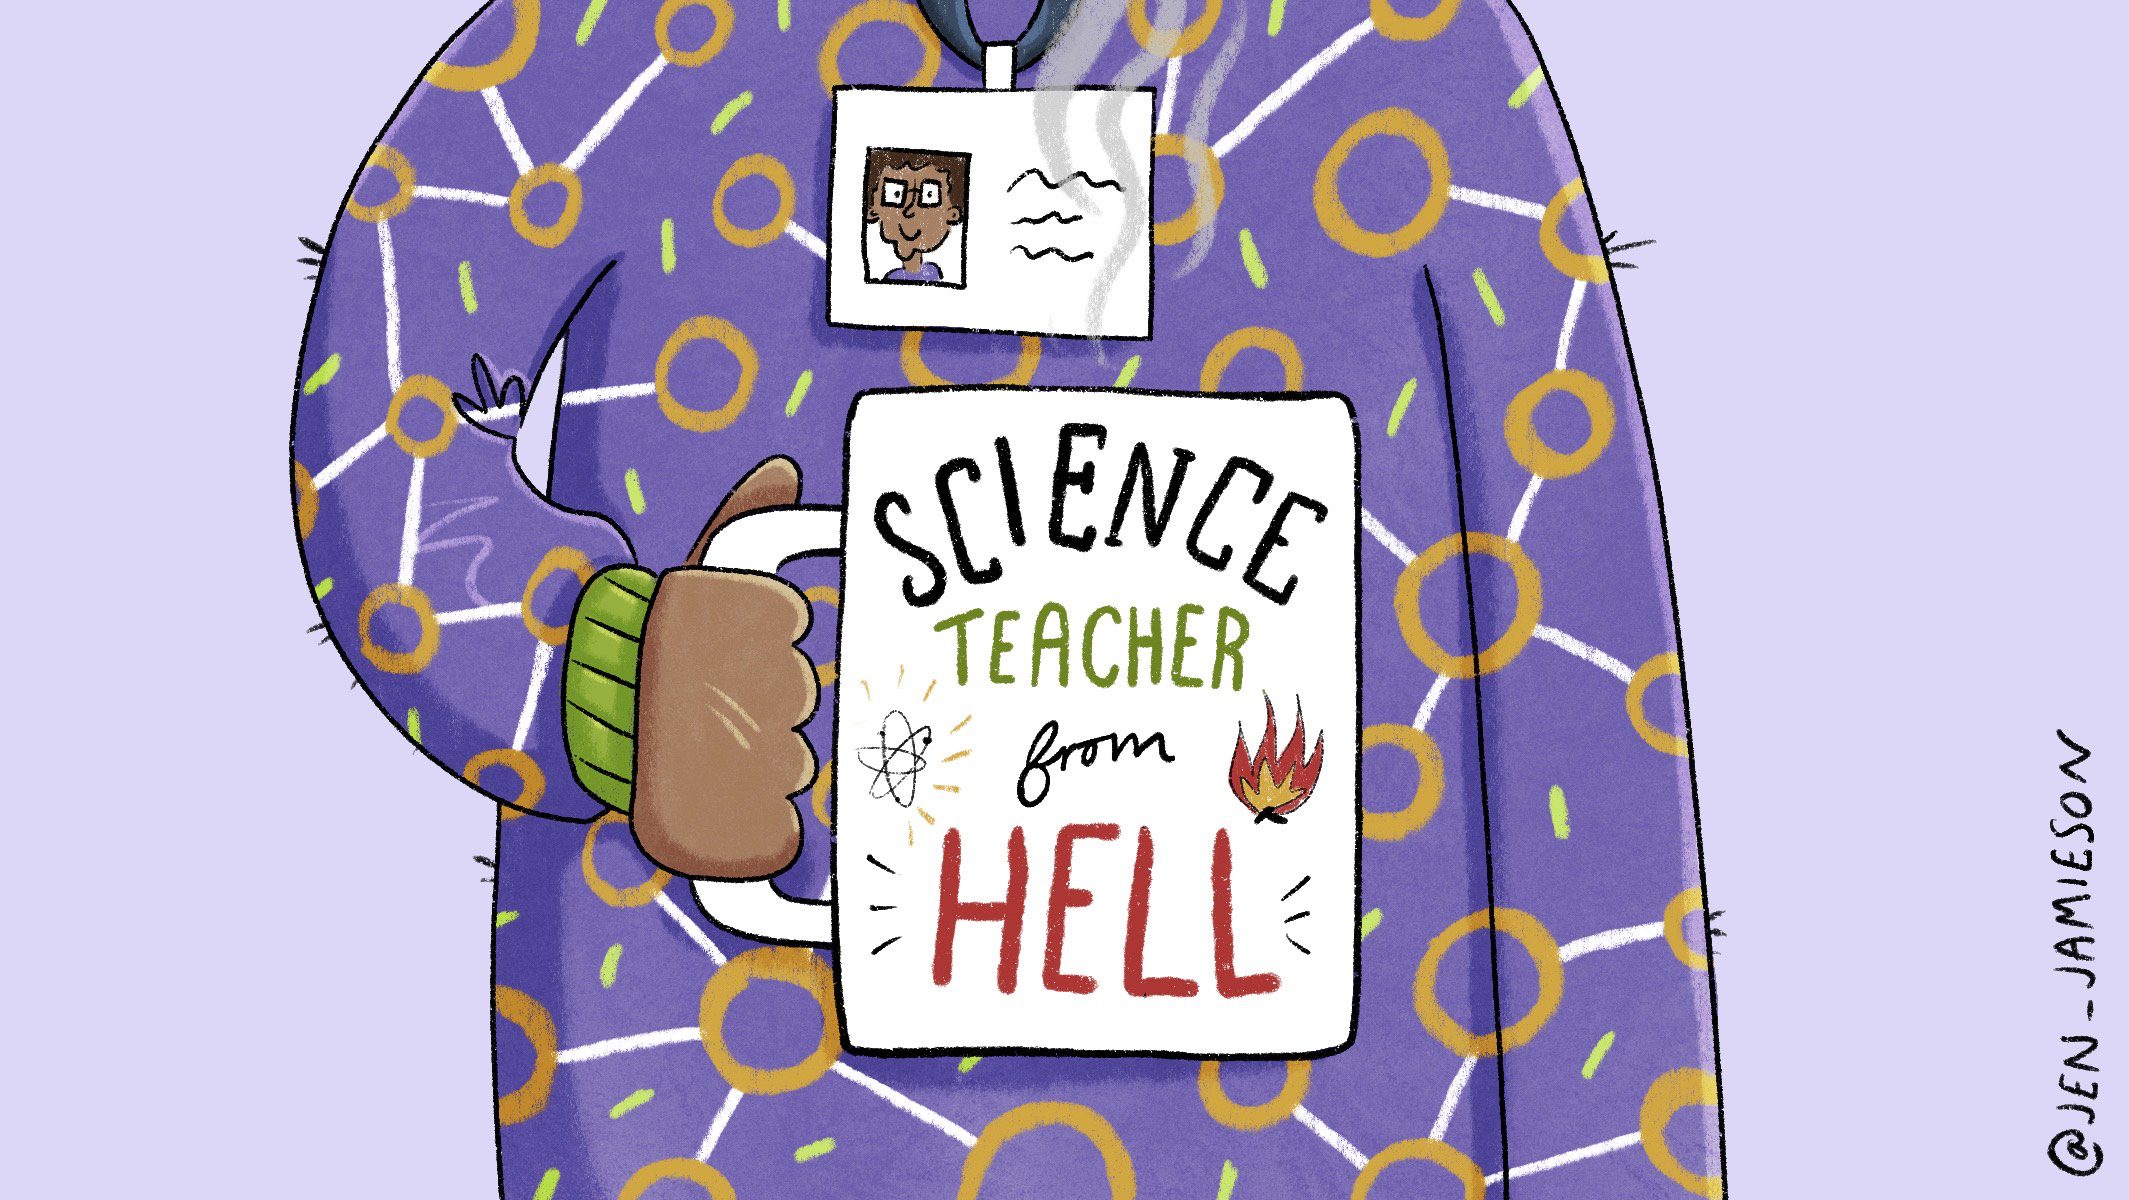 Help! A Mom Called Me a “Teacher from Hell” on FB—Should I Call Her Out?